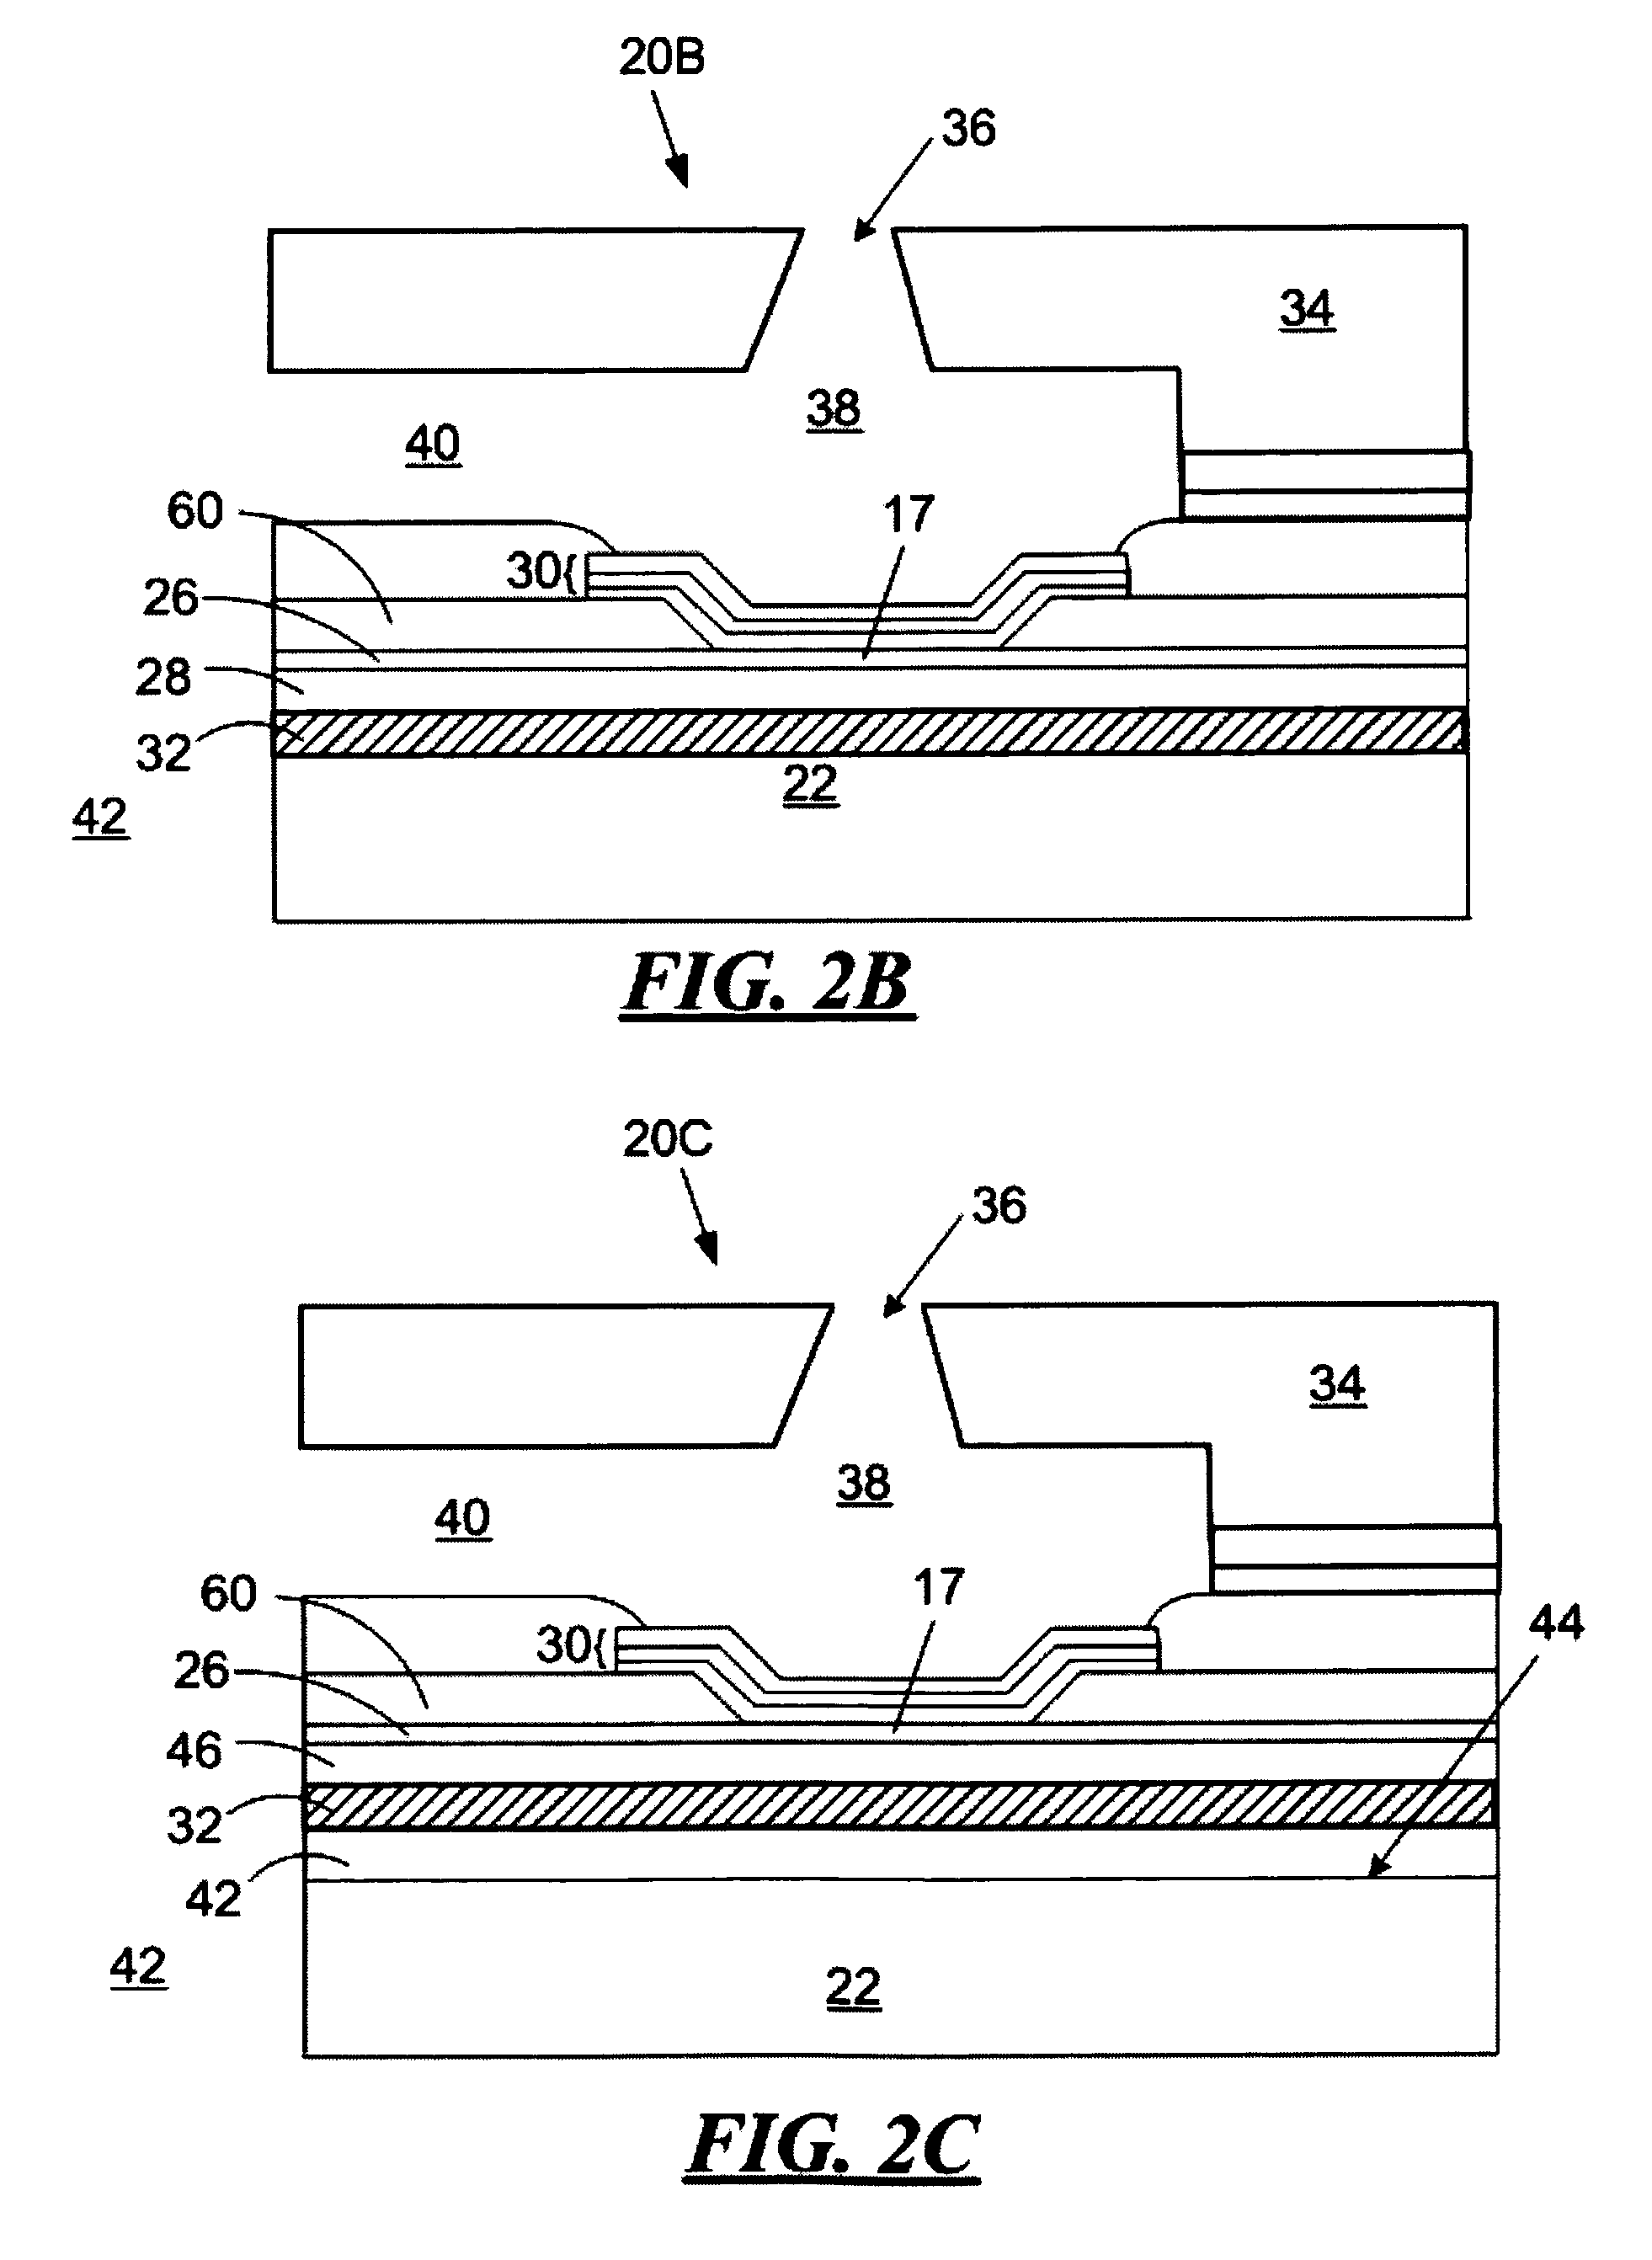 Reduction of heat loss in micro-fluid ejection devices